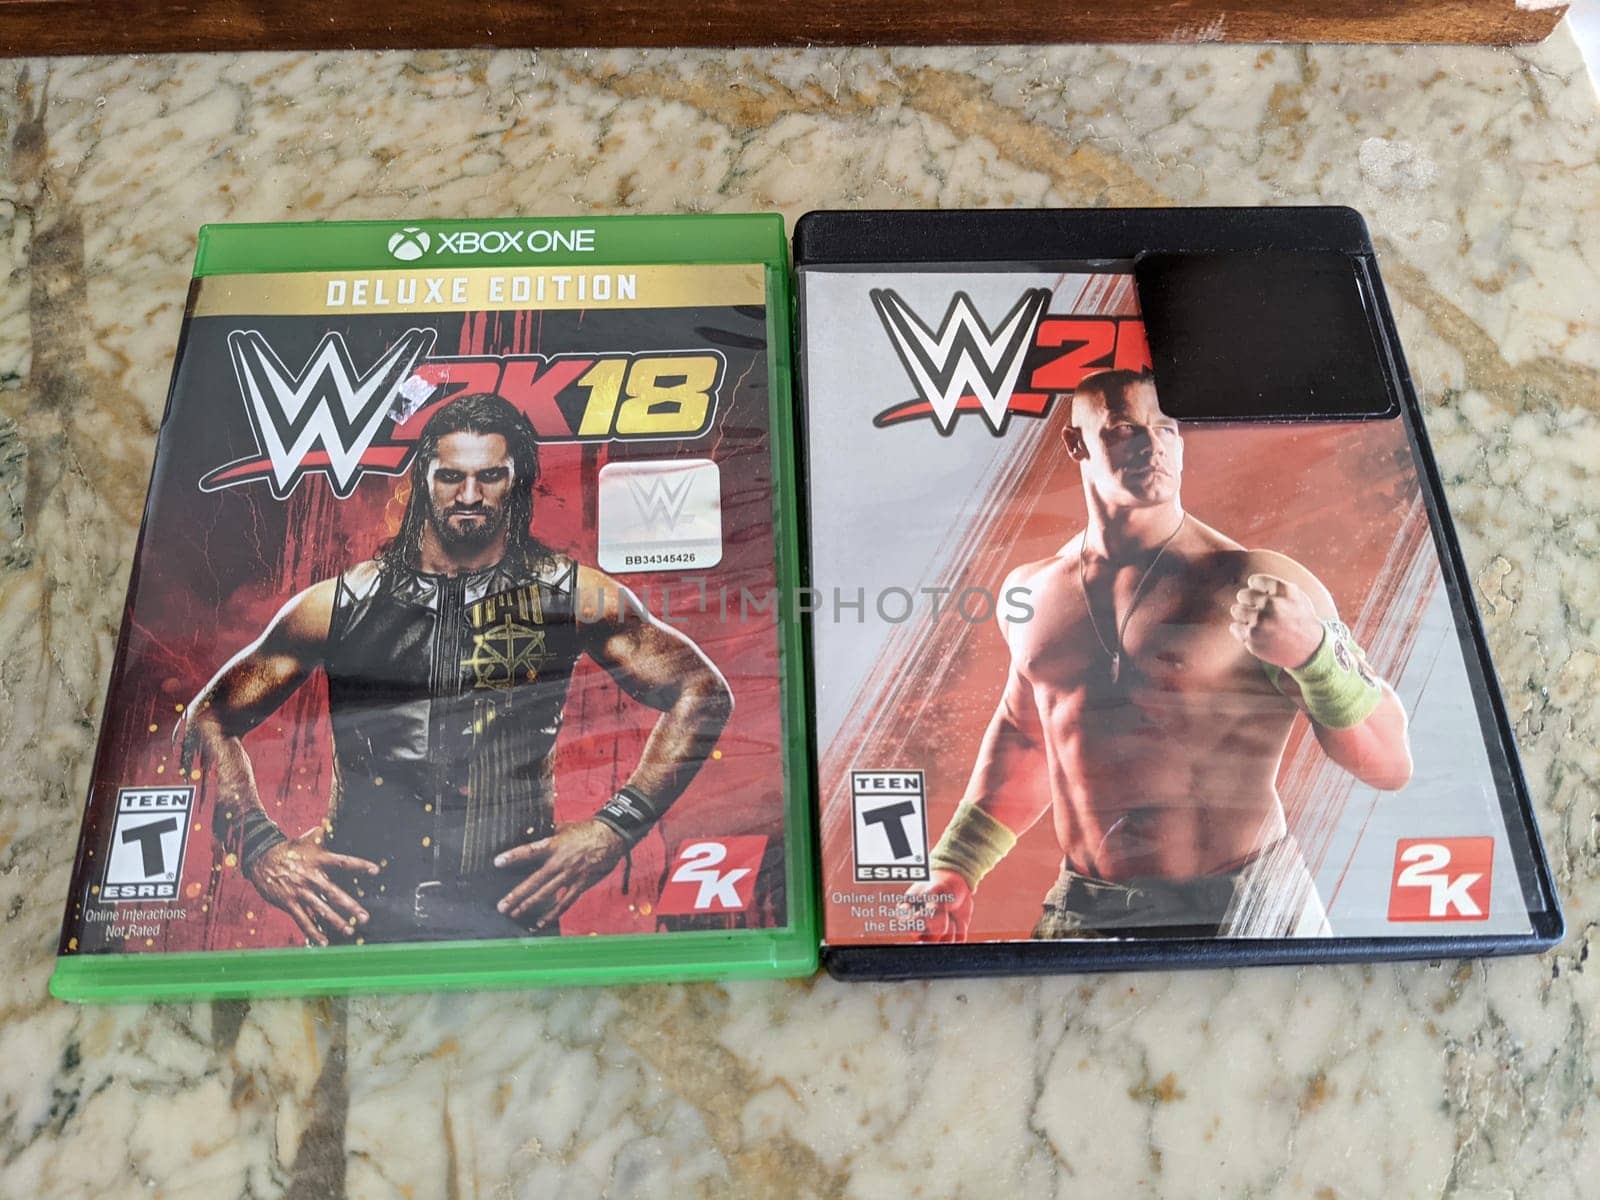 Honolulu - December 8, 2020: Two Xbox One game cases for WWE 2K18 Deluxe Edition and WWE 2K15 on a marble countertop featuring John Cena and, Seth Rollins on the covers. The cases have the WWE and 2K logos and are rated T for Teen. 